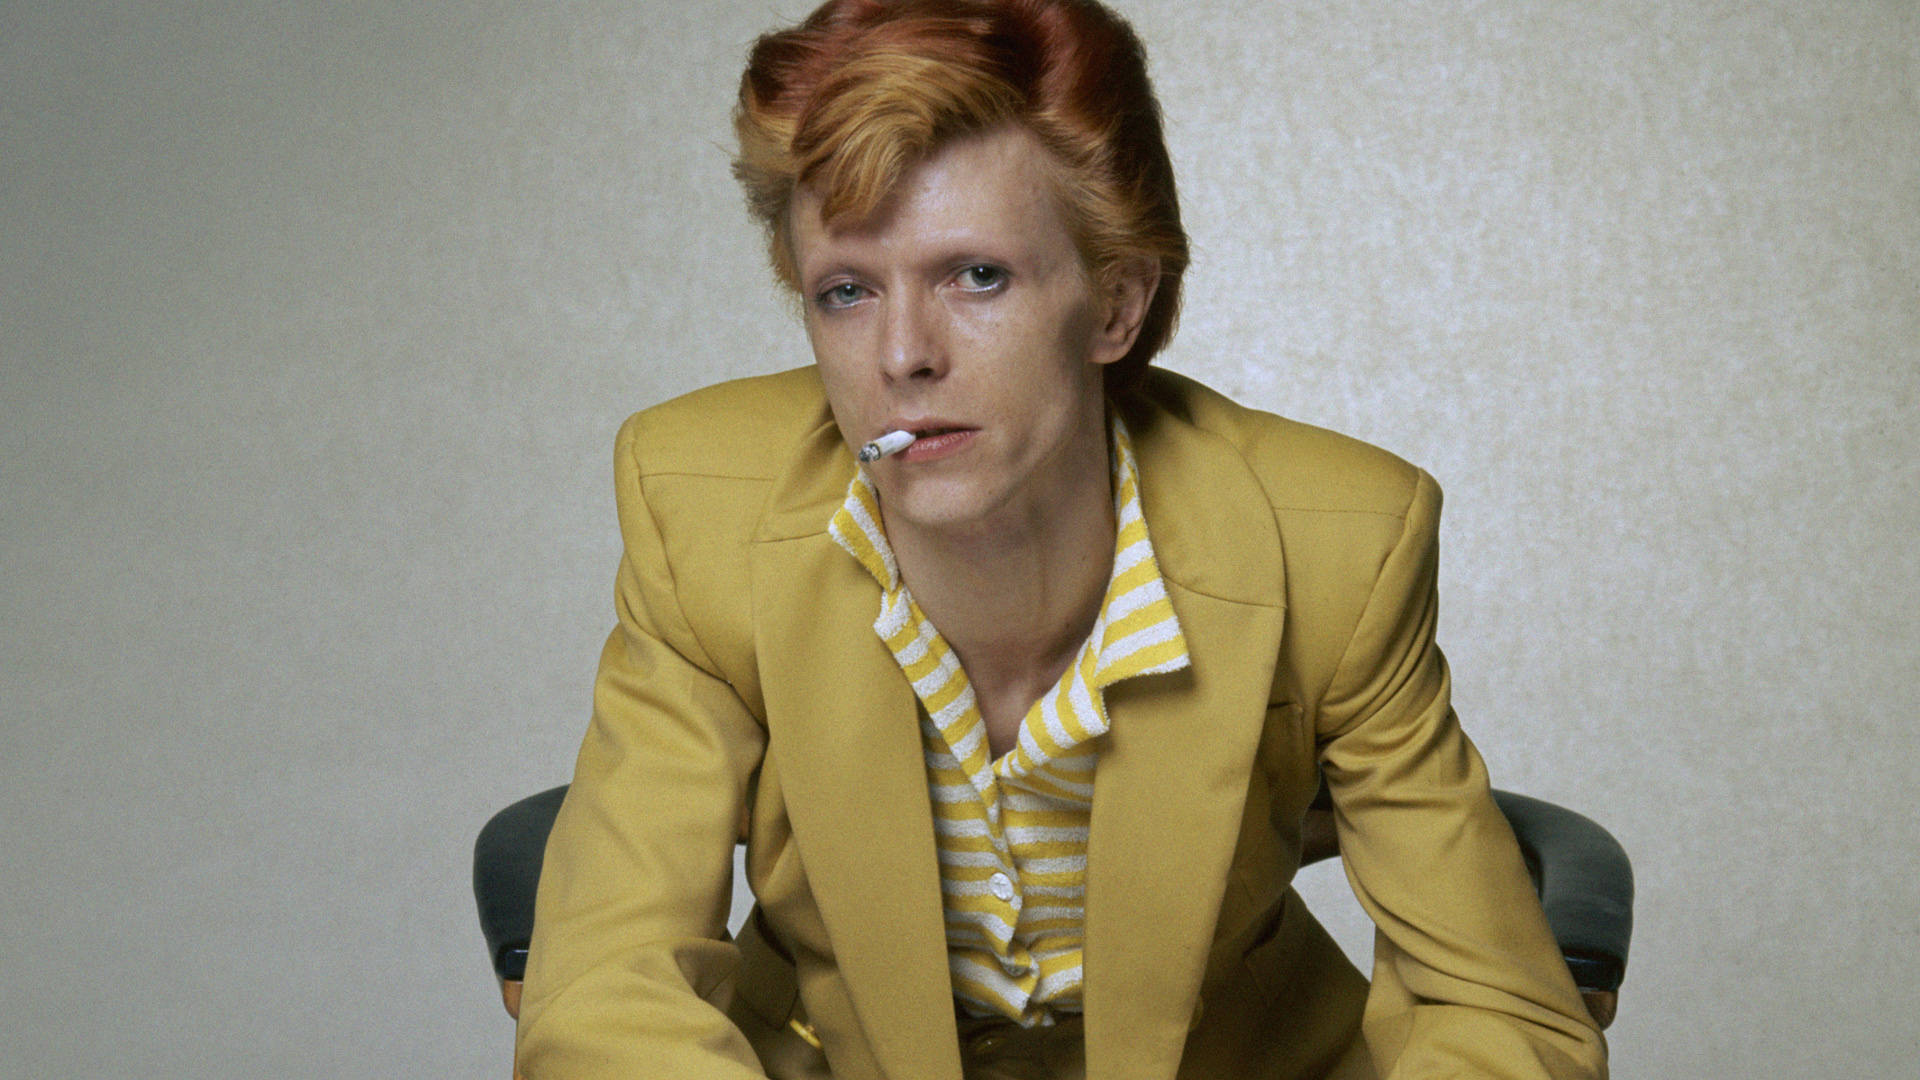 David Bowie Yellow Suit Background